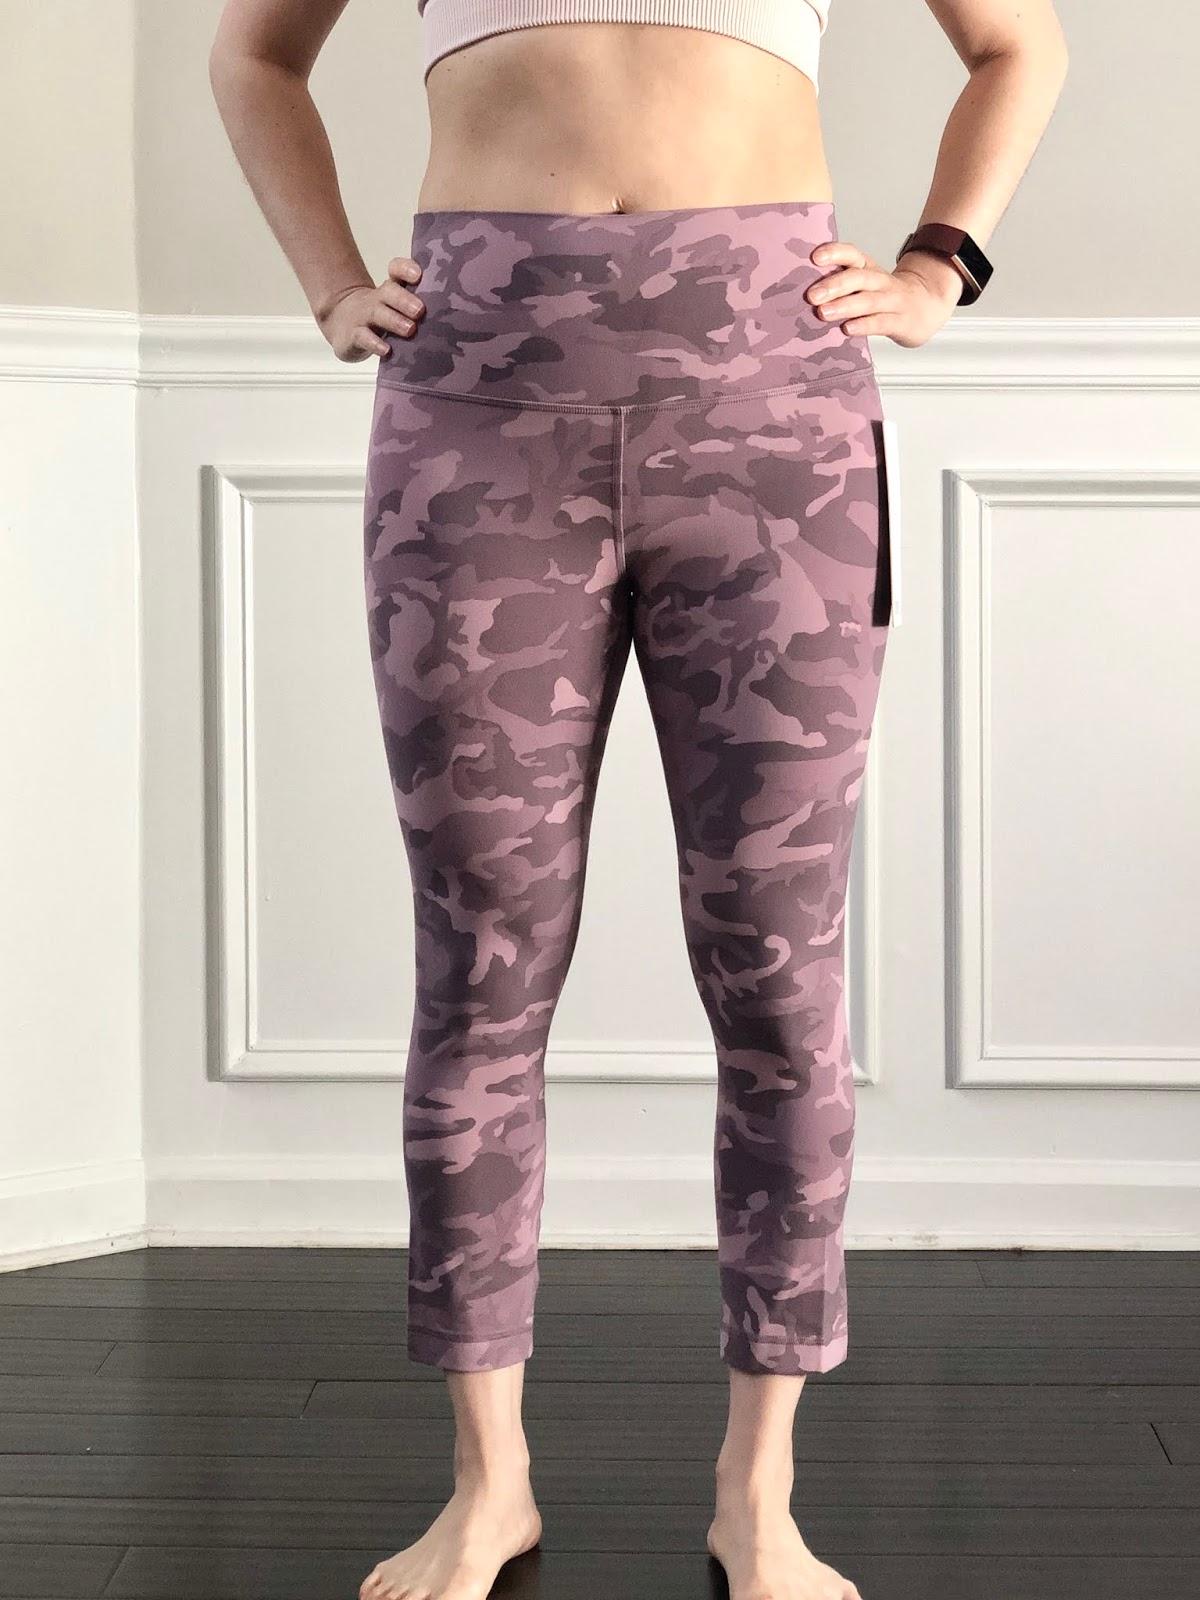 lululemon Align™ High-Rise Pant 24 *Asia Fit, Intensity Pink Blossom  Multi